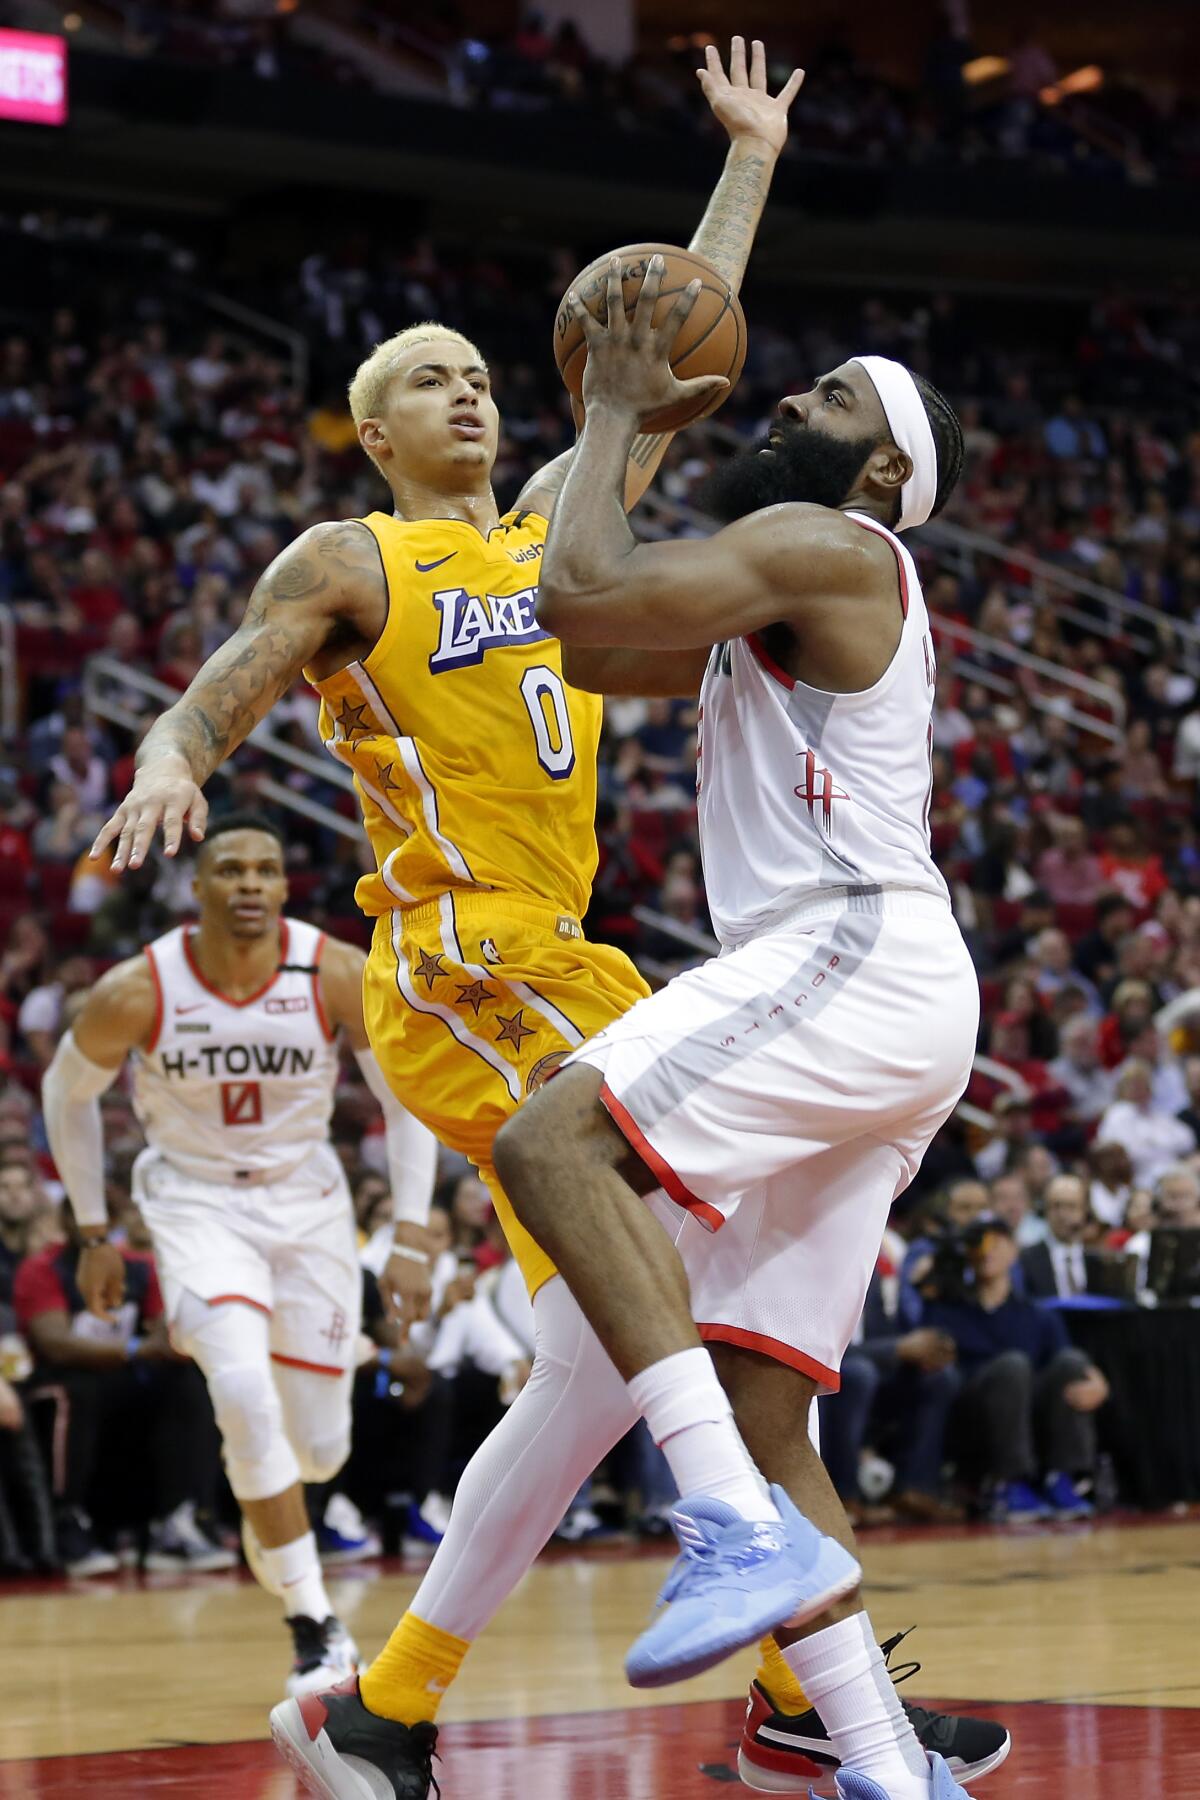 Kyle Kuzma pressures James Harden into a shot during the second half of Saturday's game.